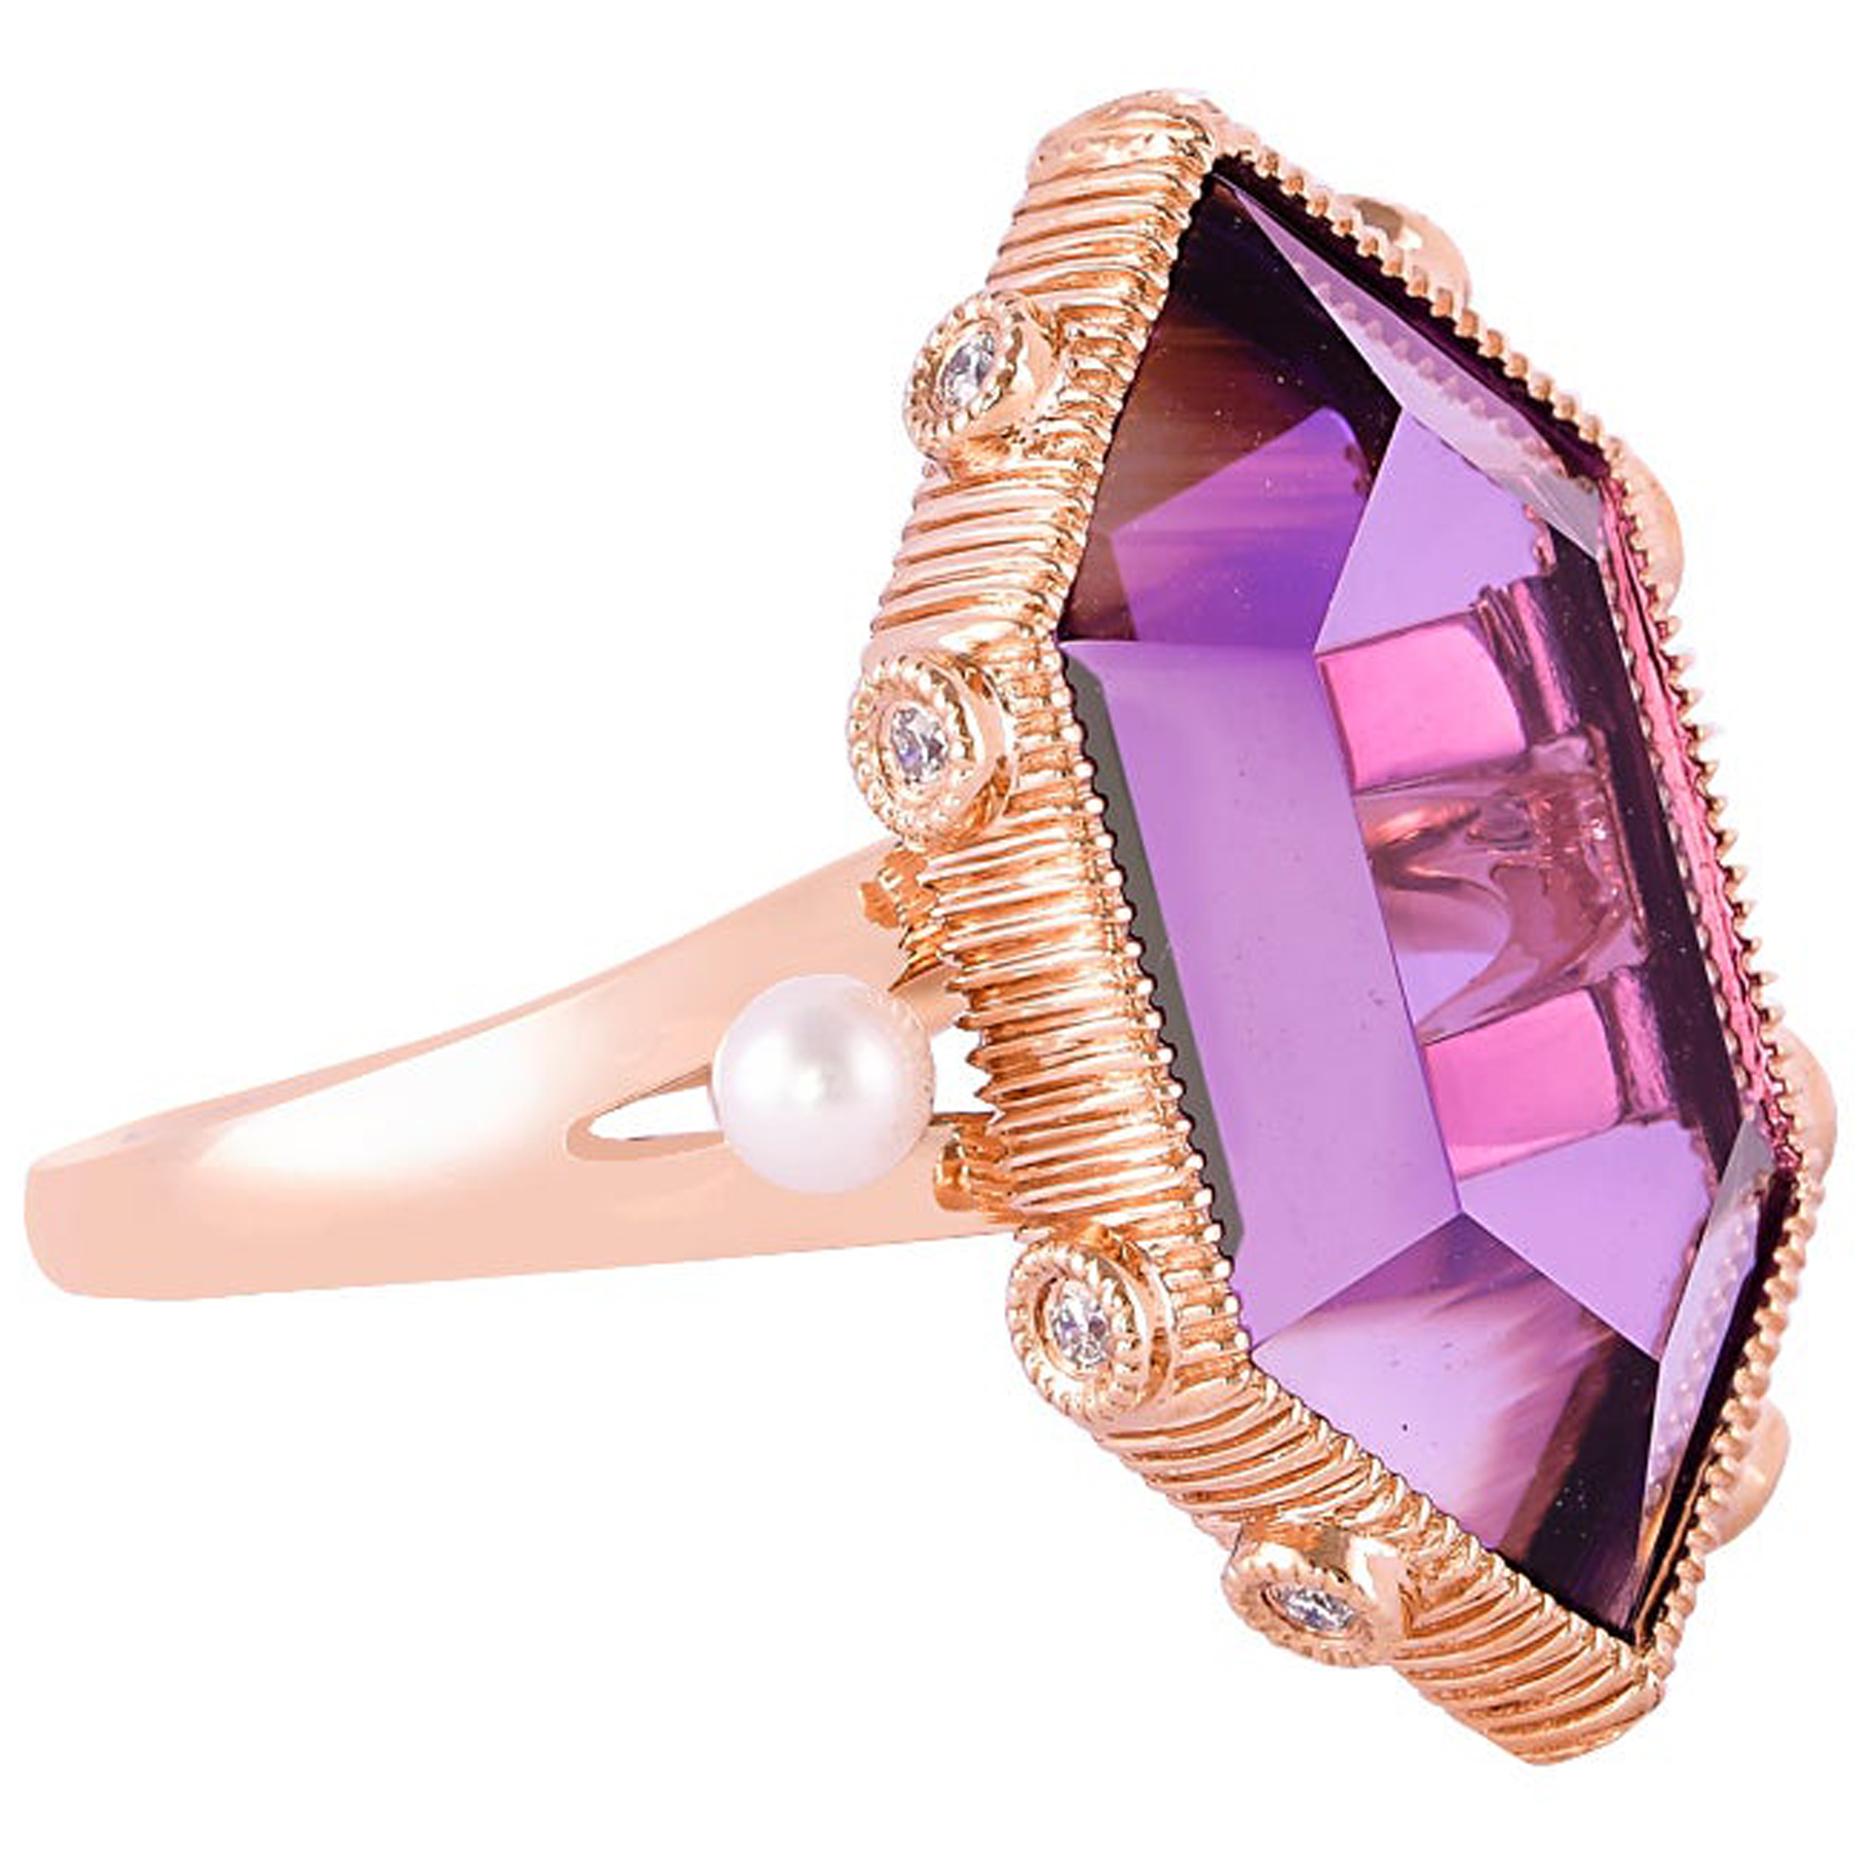 8.04 Carat Amethyst Ring in 18 Karat Rose Gold with Diamond and Pearls